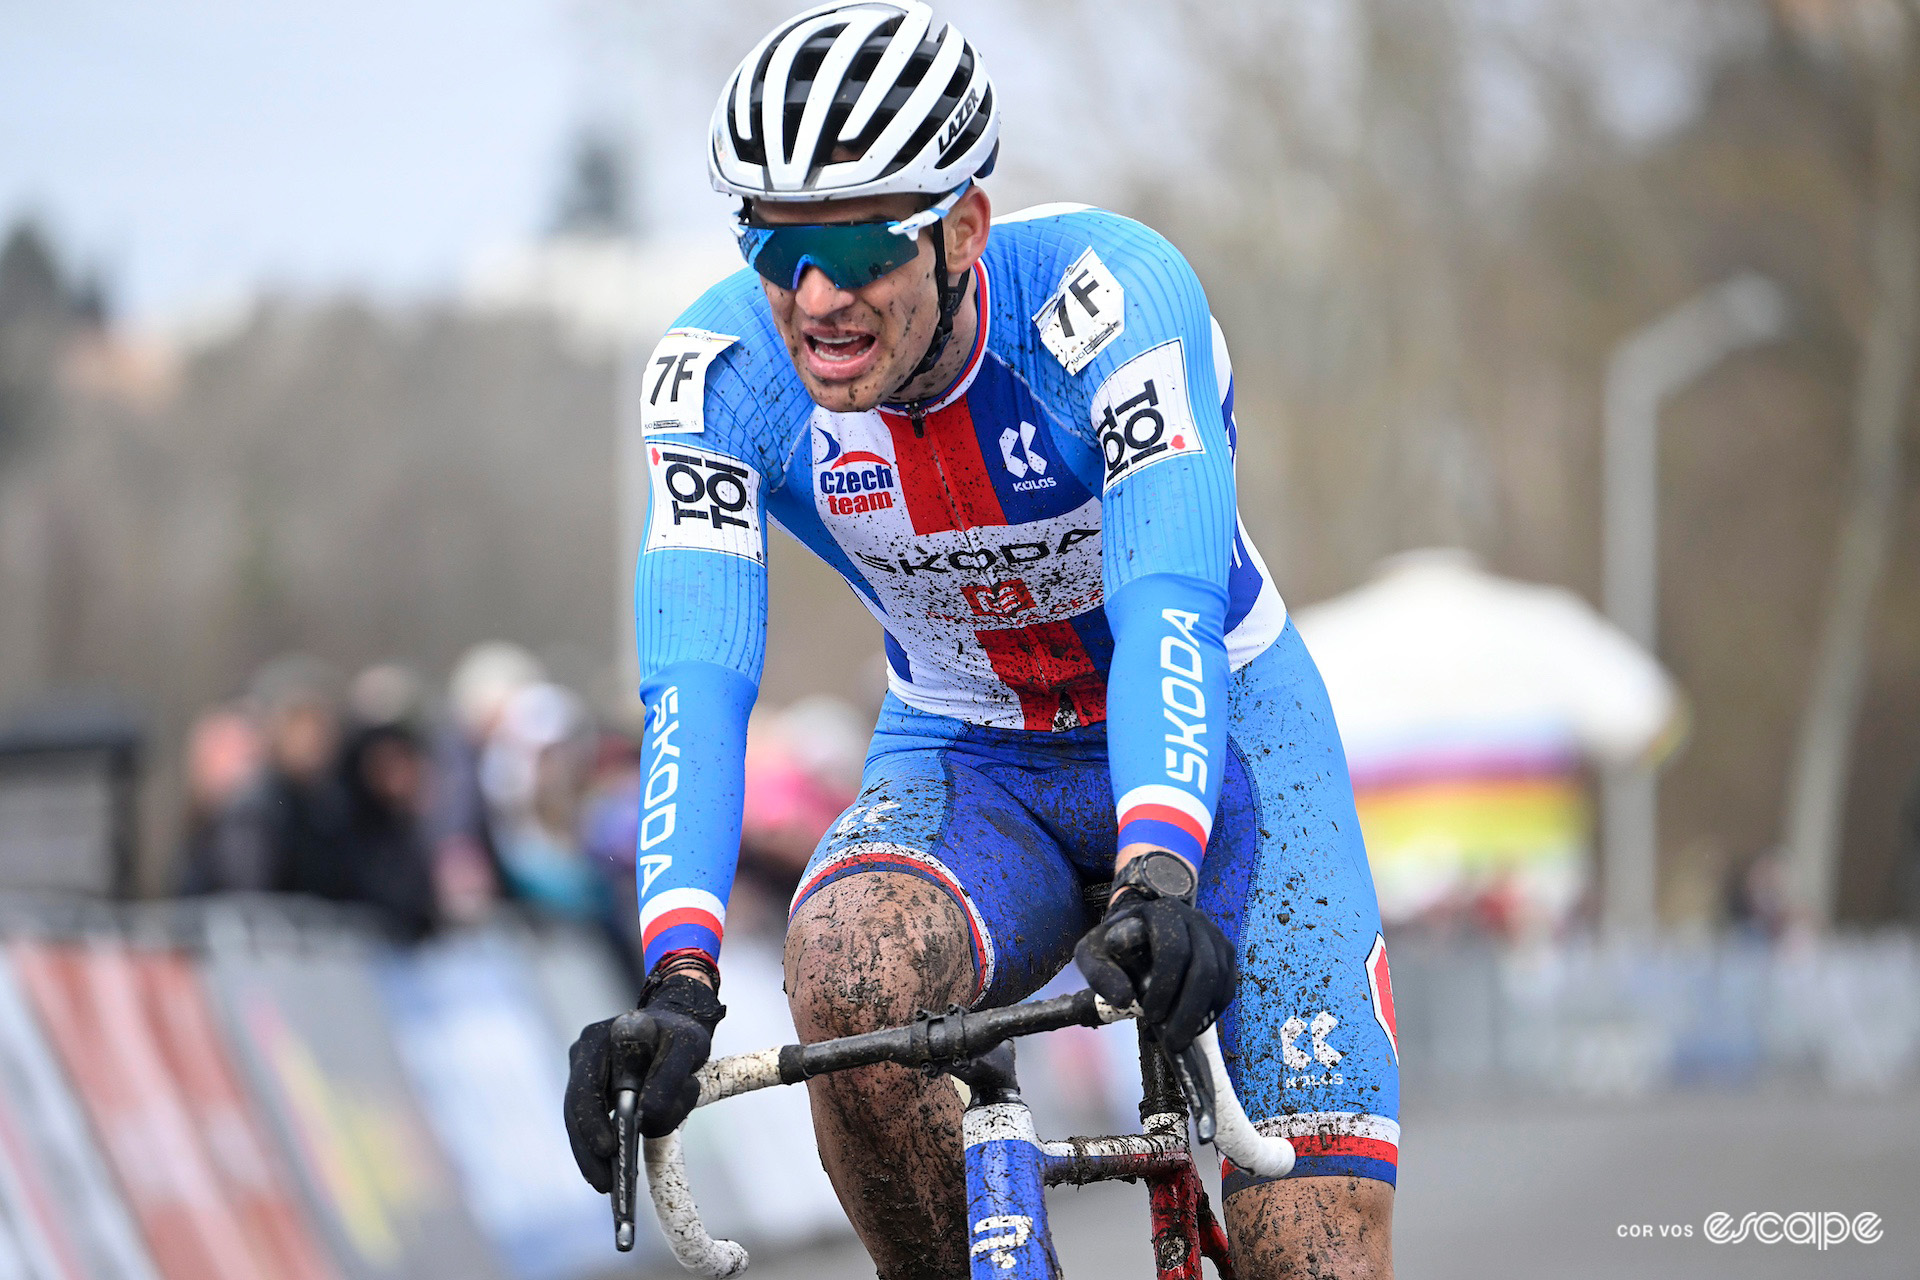 Zdeněk Štybar in his mud-splattered Czech national kit during the UCI Cyclo-Cross World Championships in Tábor.